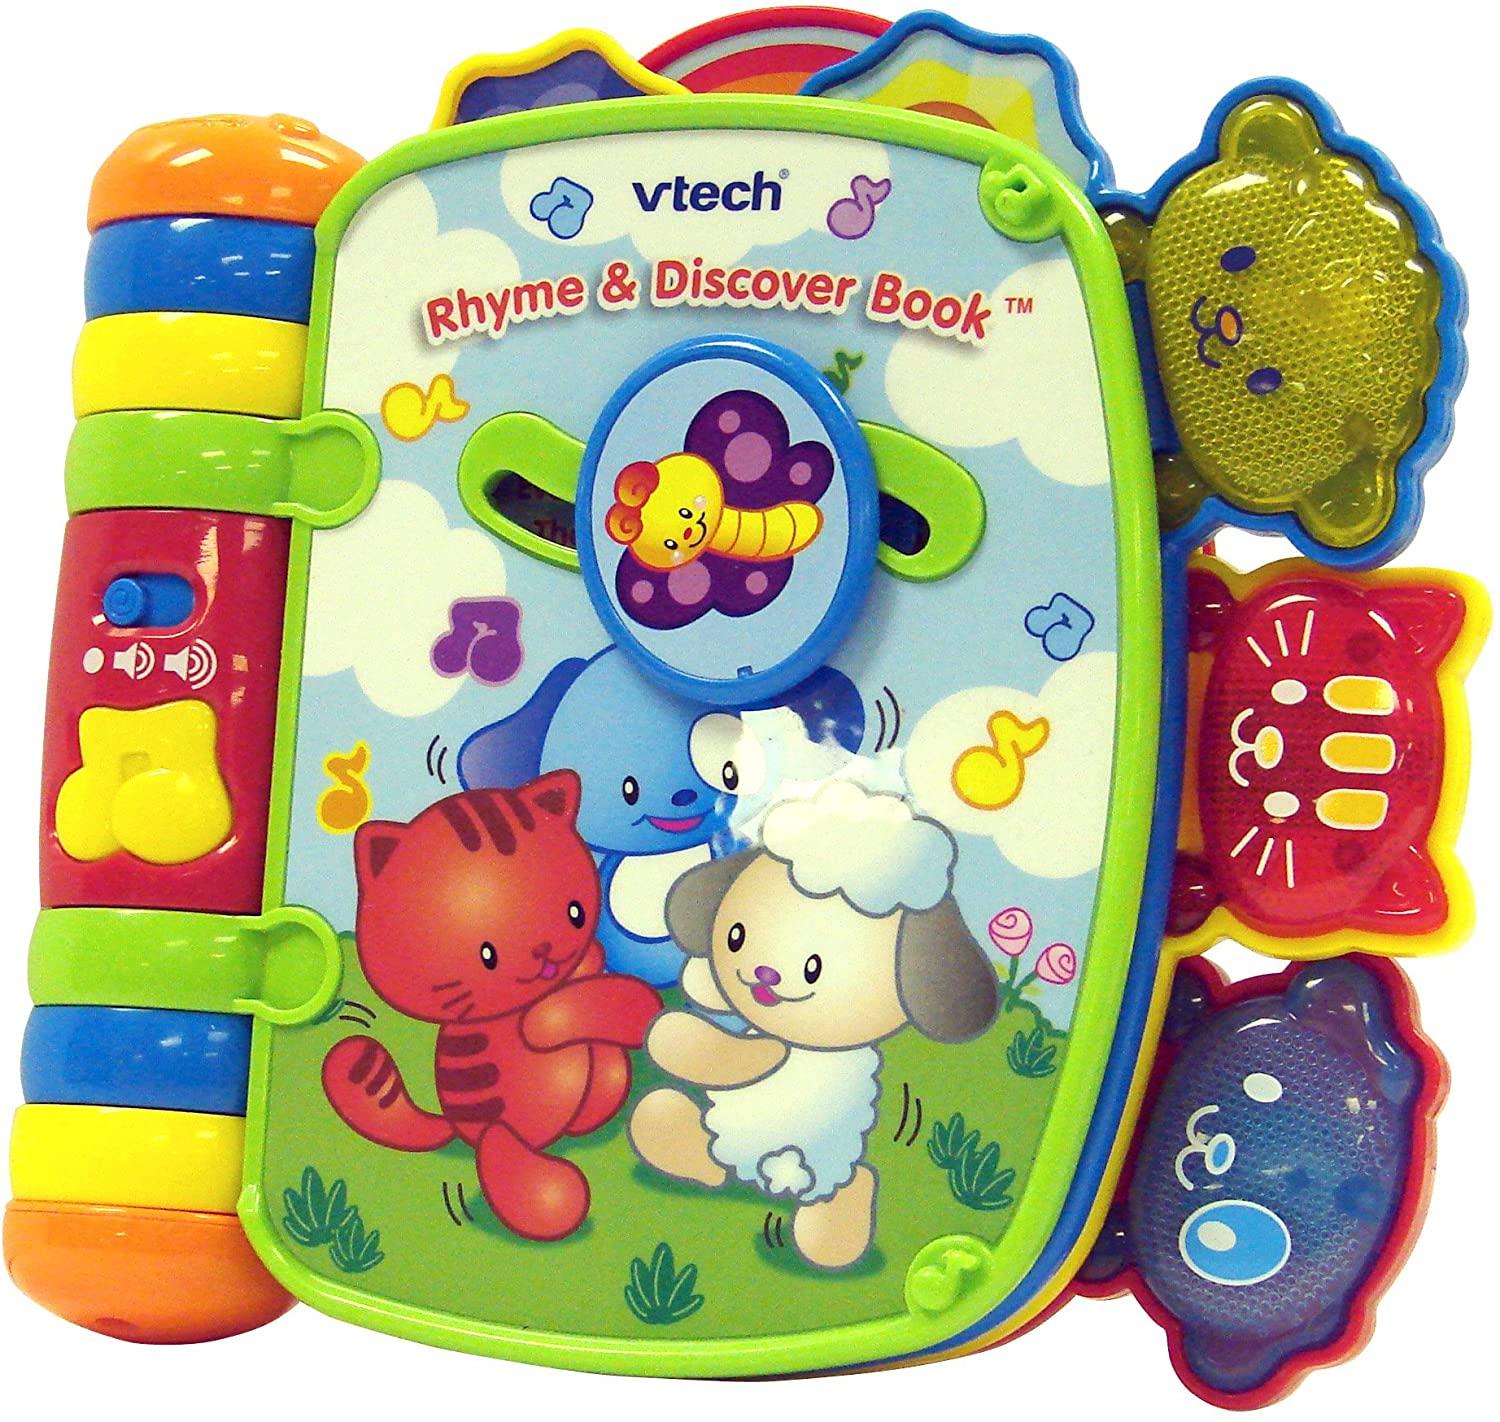 VTech Rhyme and Discover Book for $9.99